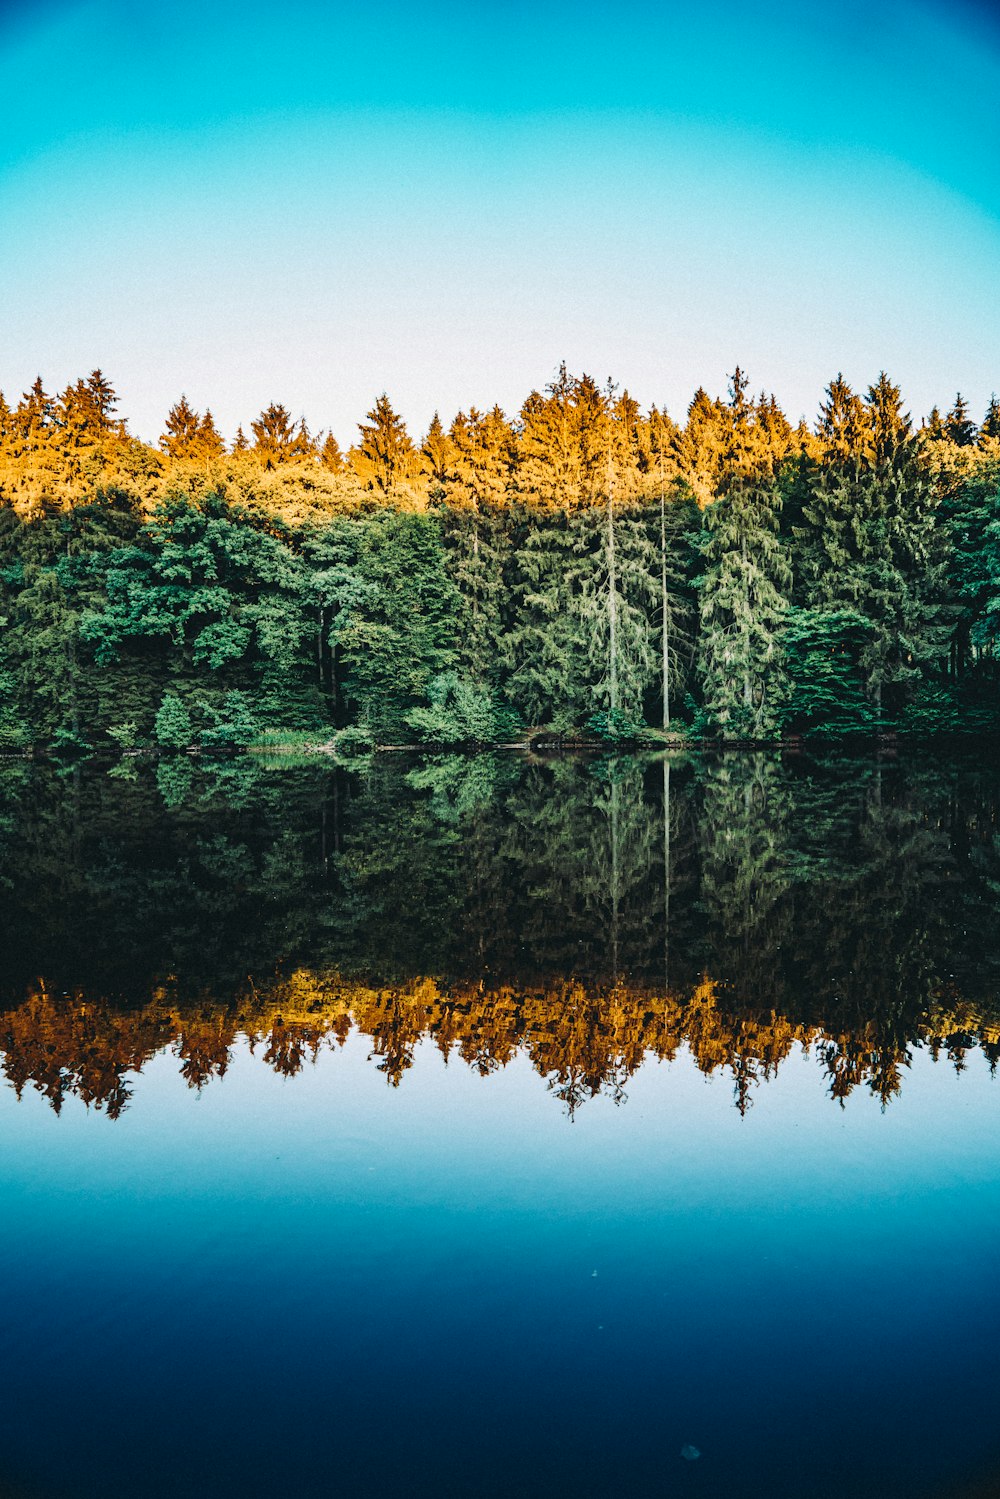 photography of trees reflecting on body of water under clear blue sky